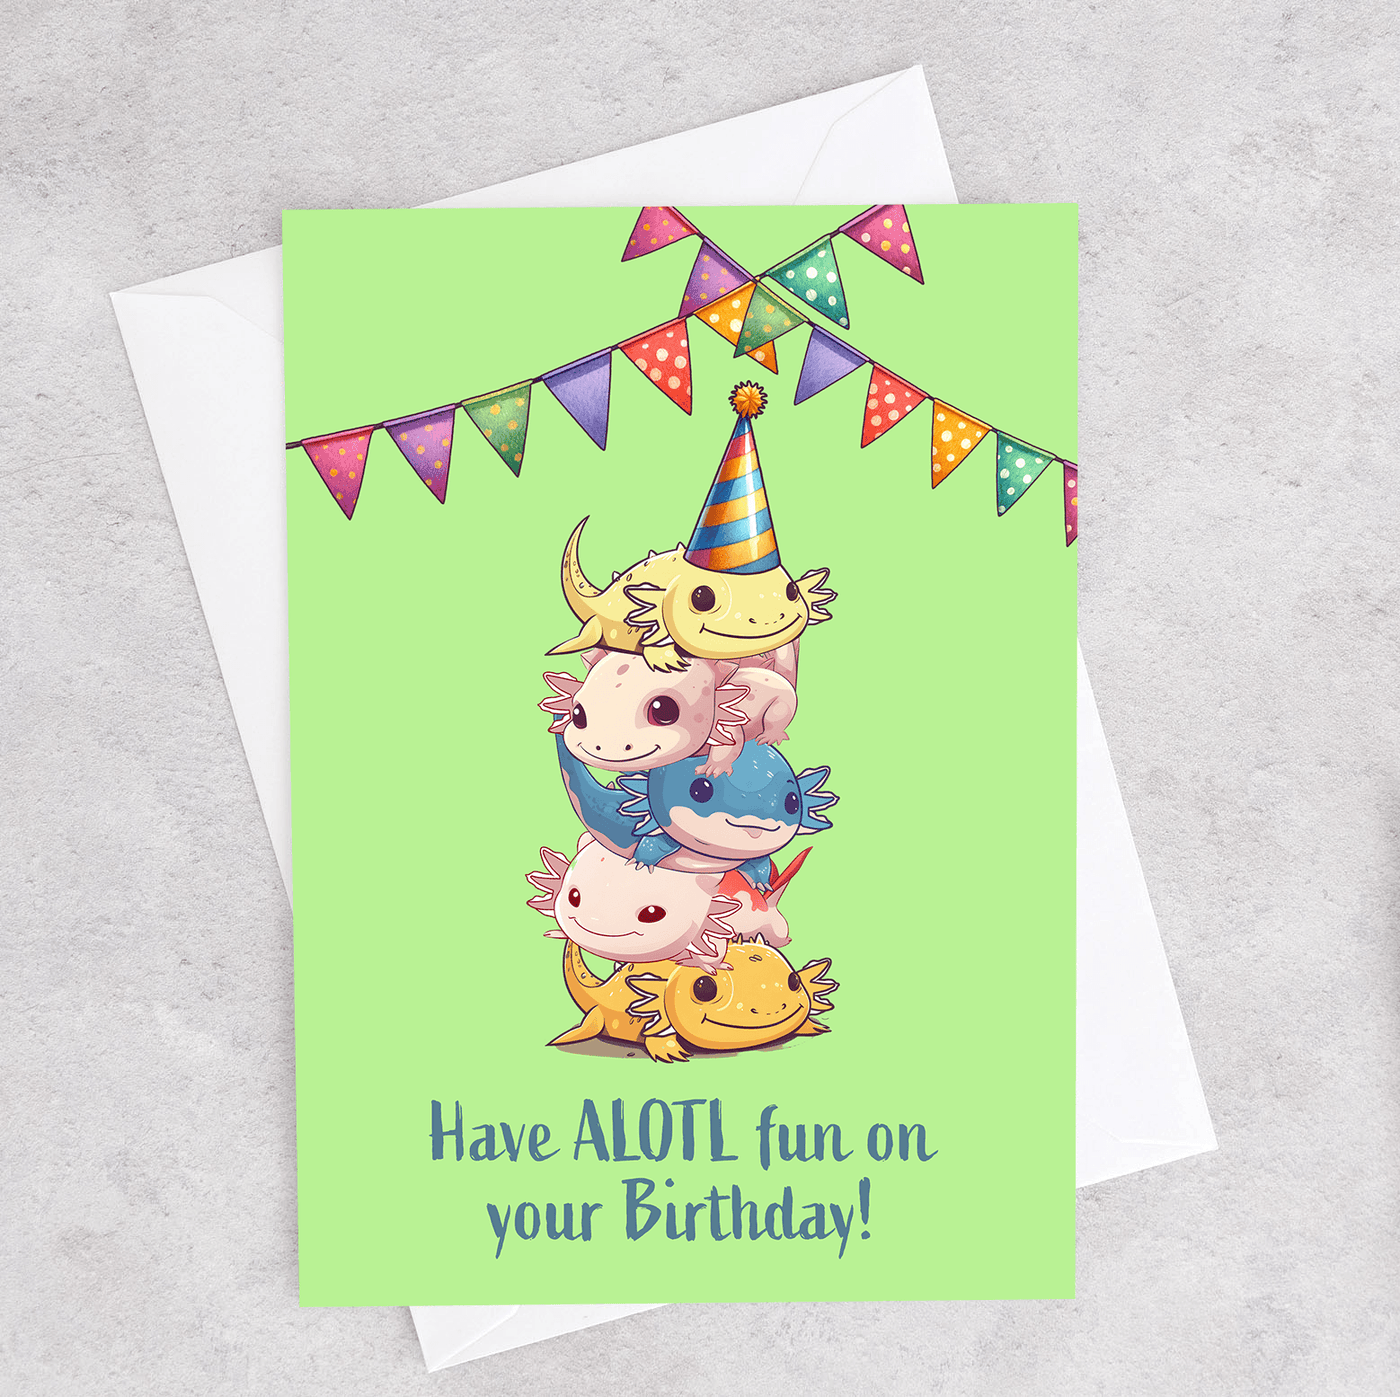 This birthday card shows a stack of Axolotls and says "Have Alotl Fun on your birthday"